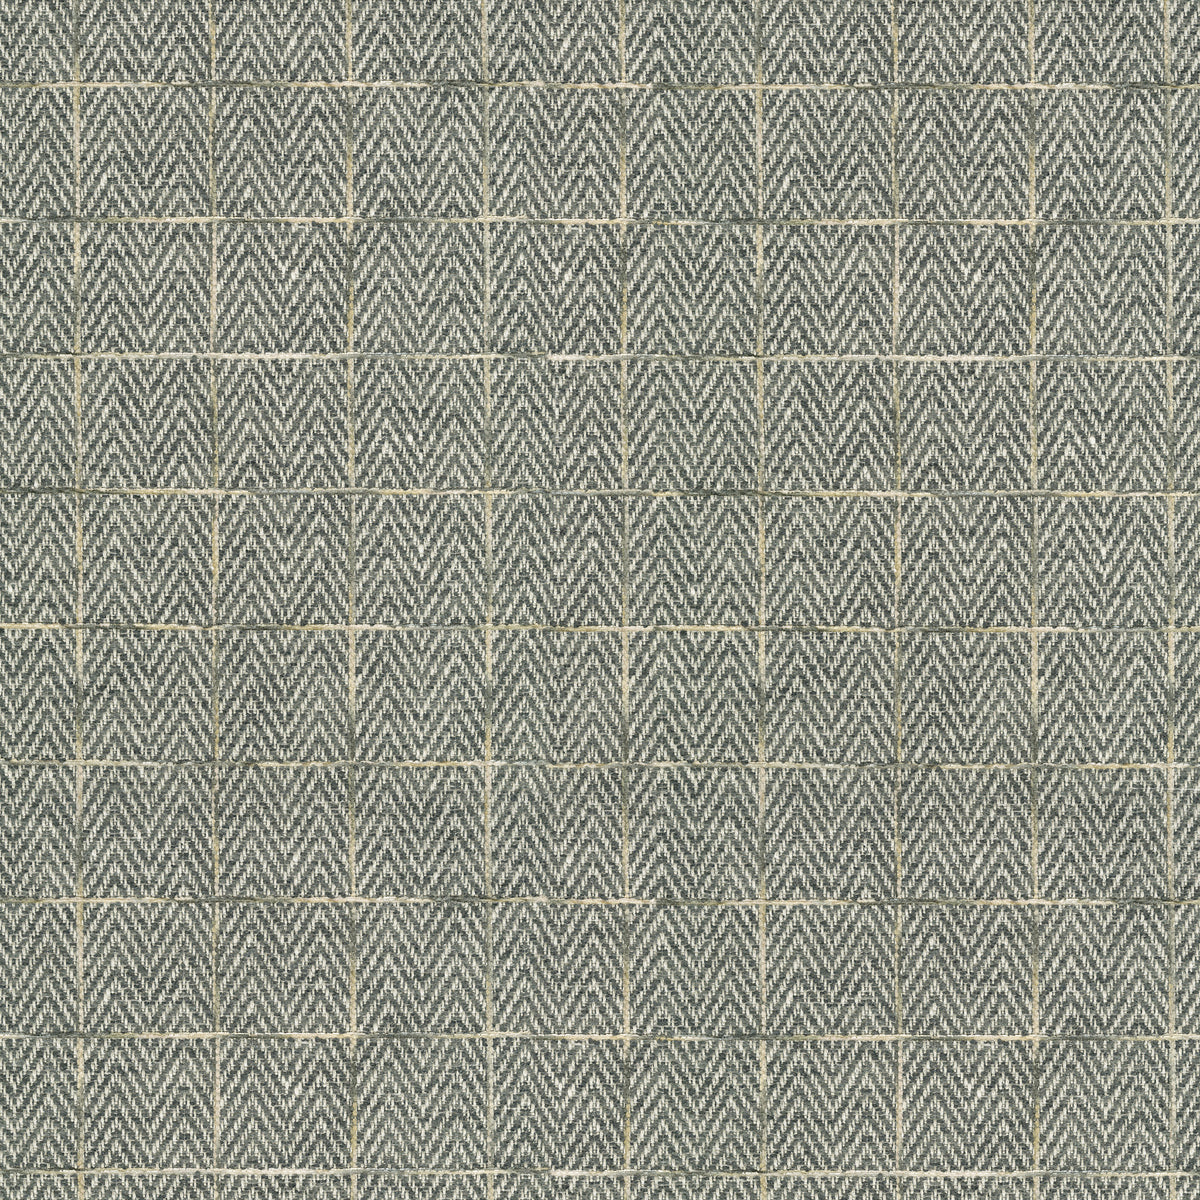 P/K Lifestyles Malay Tweed - Charcoal 411771 Fabric Swatch